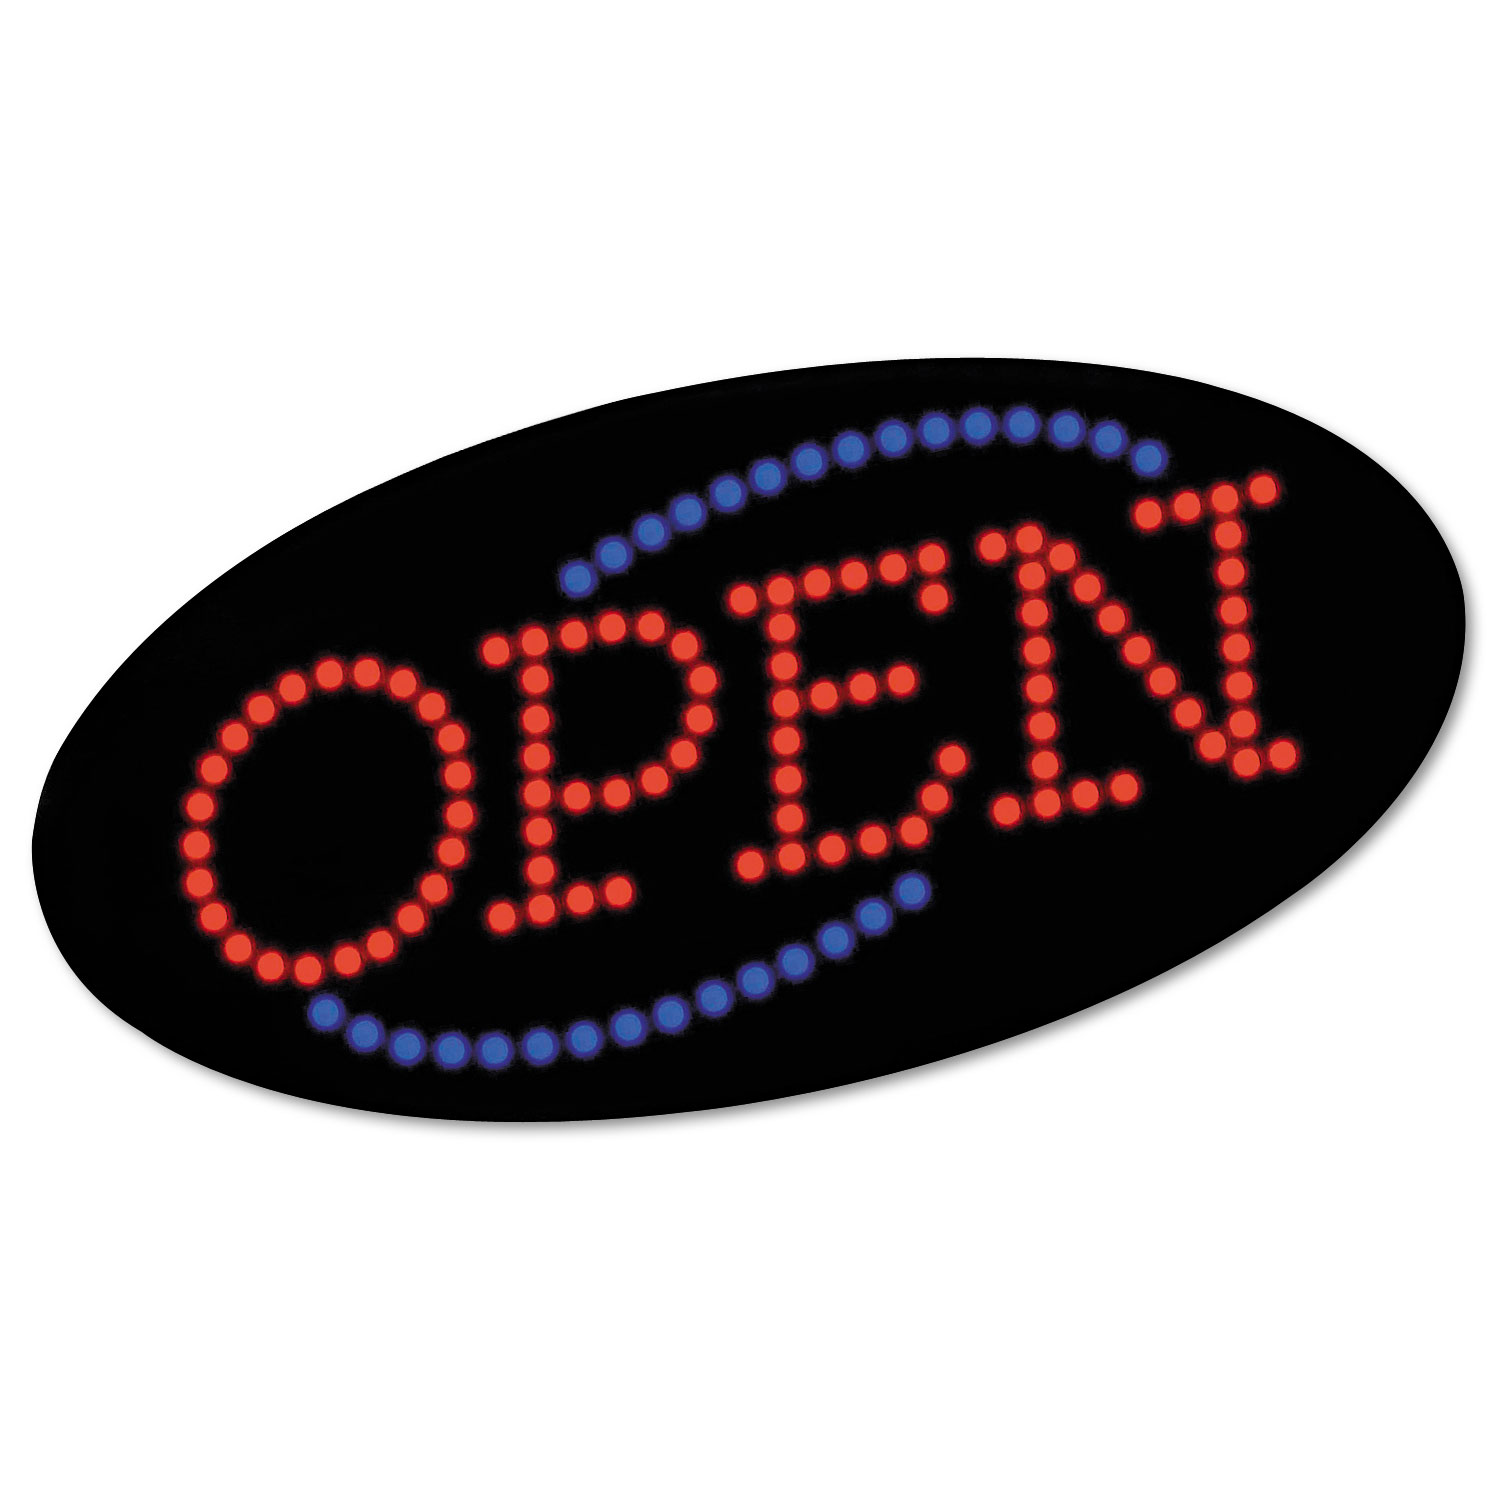  COSCO 098099 LED OPEN Sign, 10 1/2: x 20 1/8, Red & Blue Graphics (COS098099) 